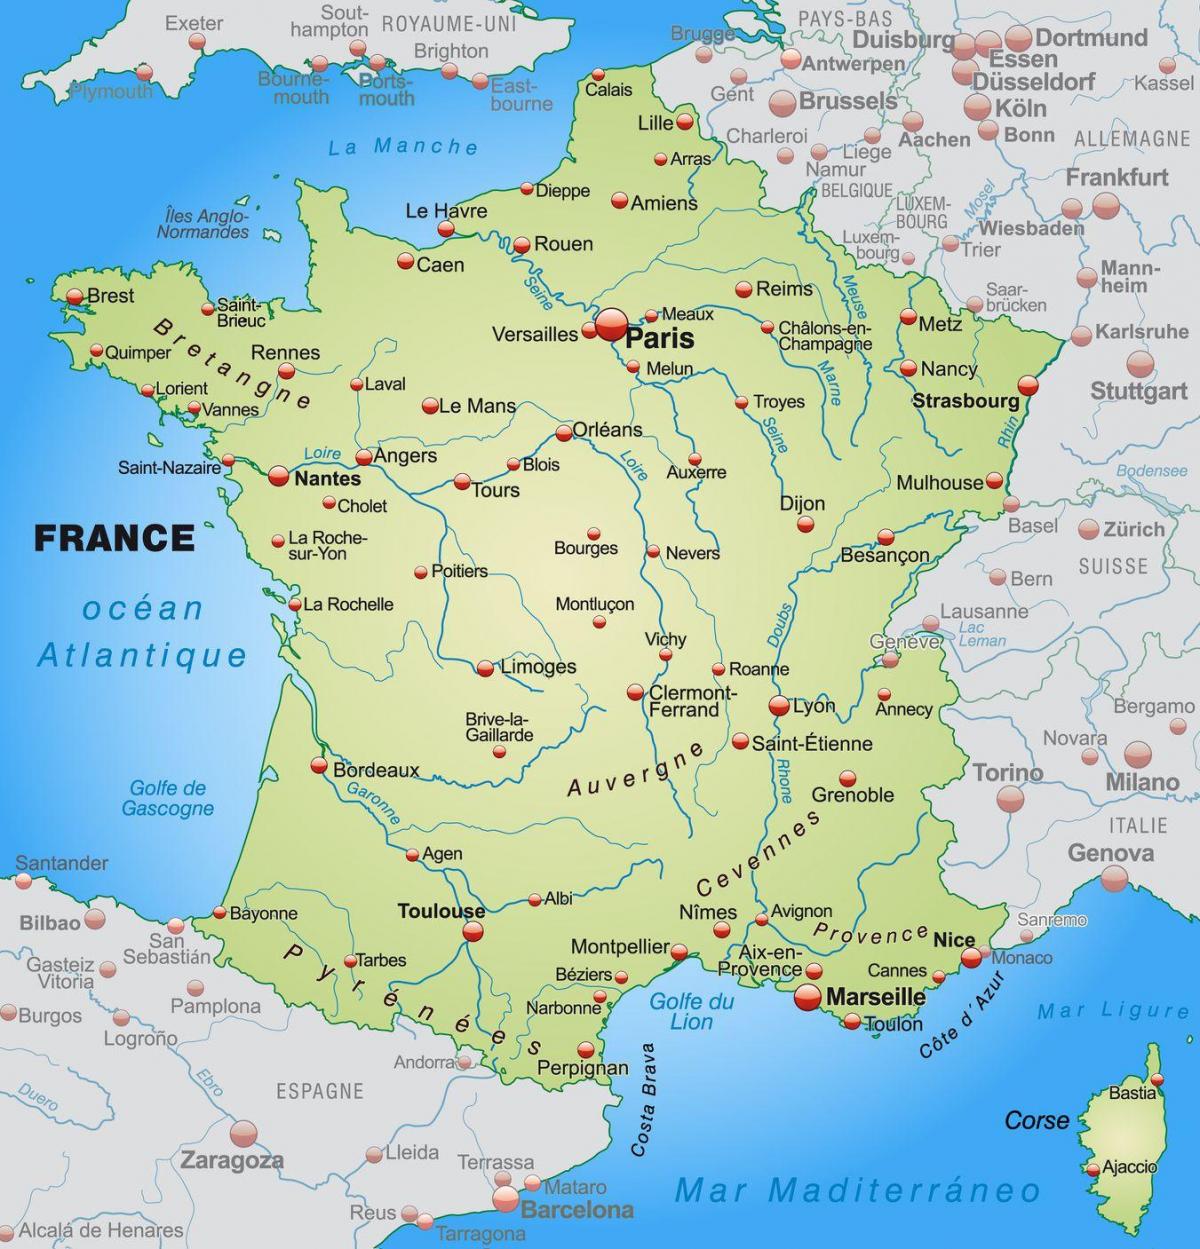 France on a map